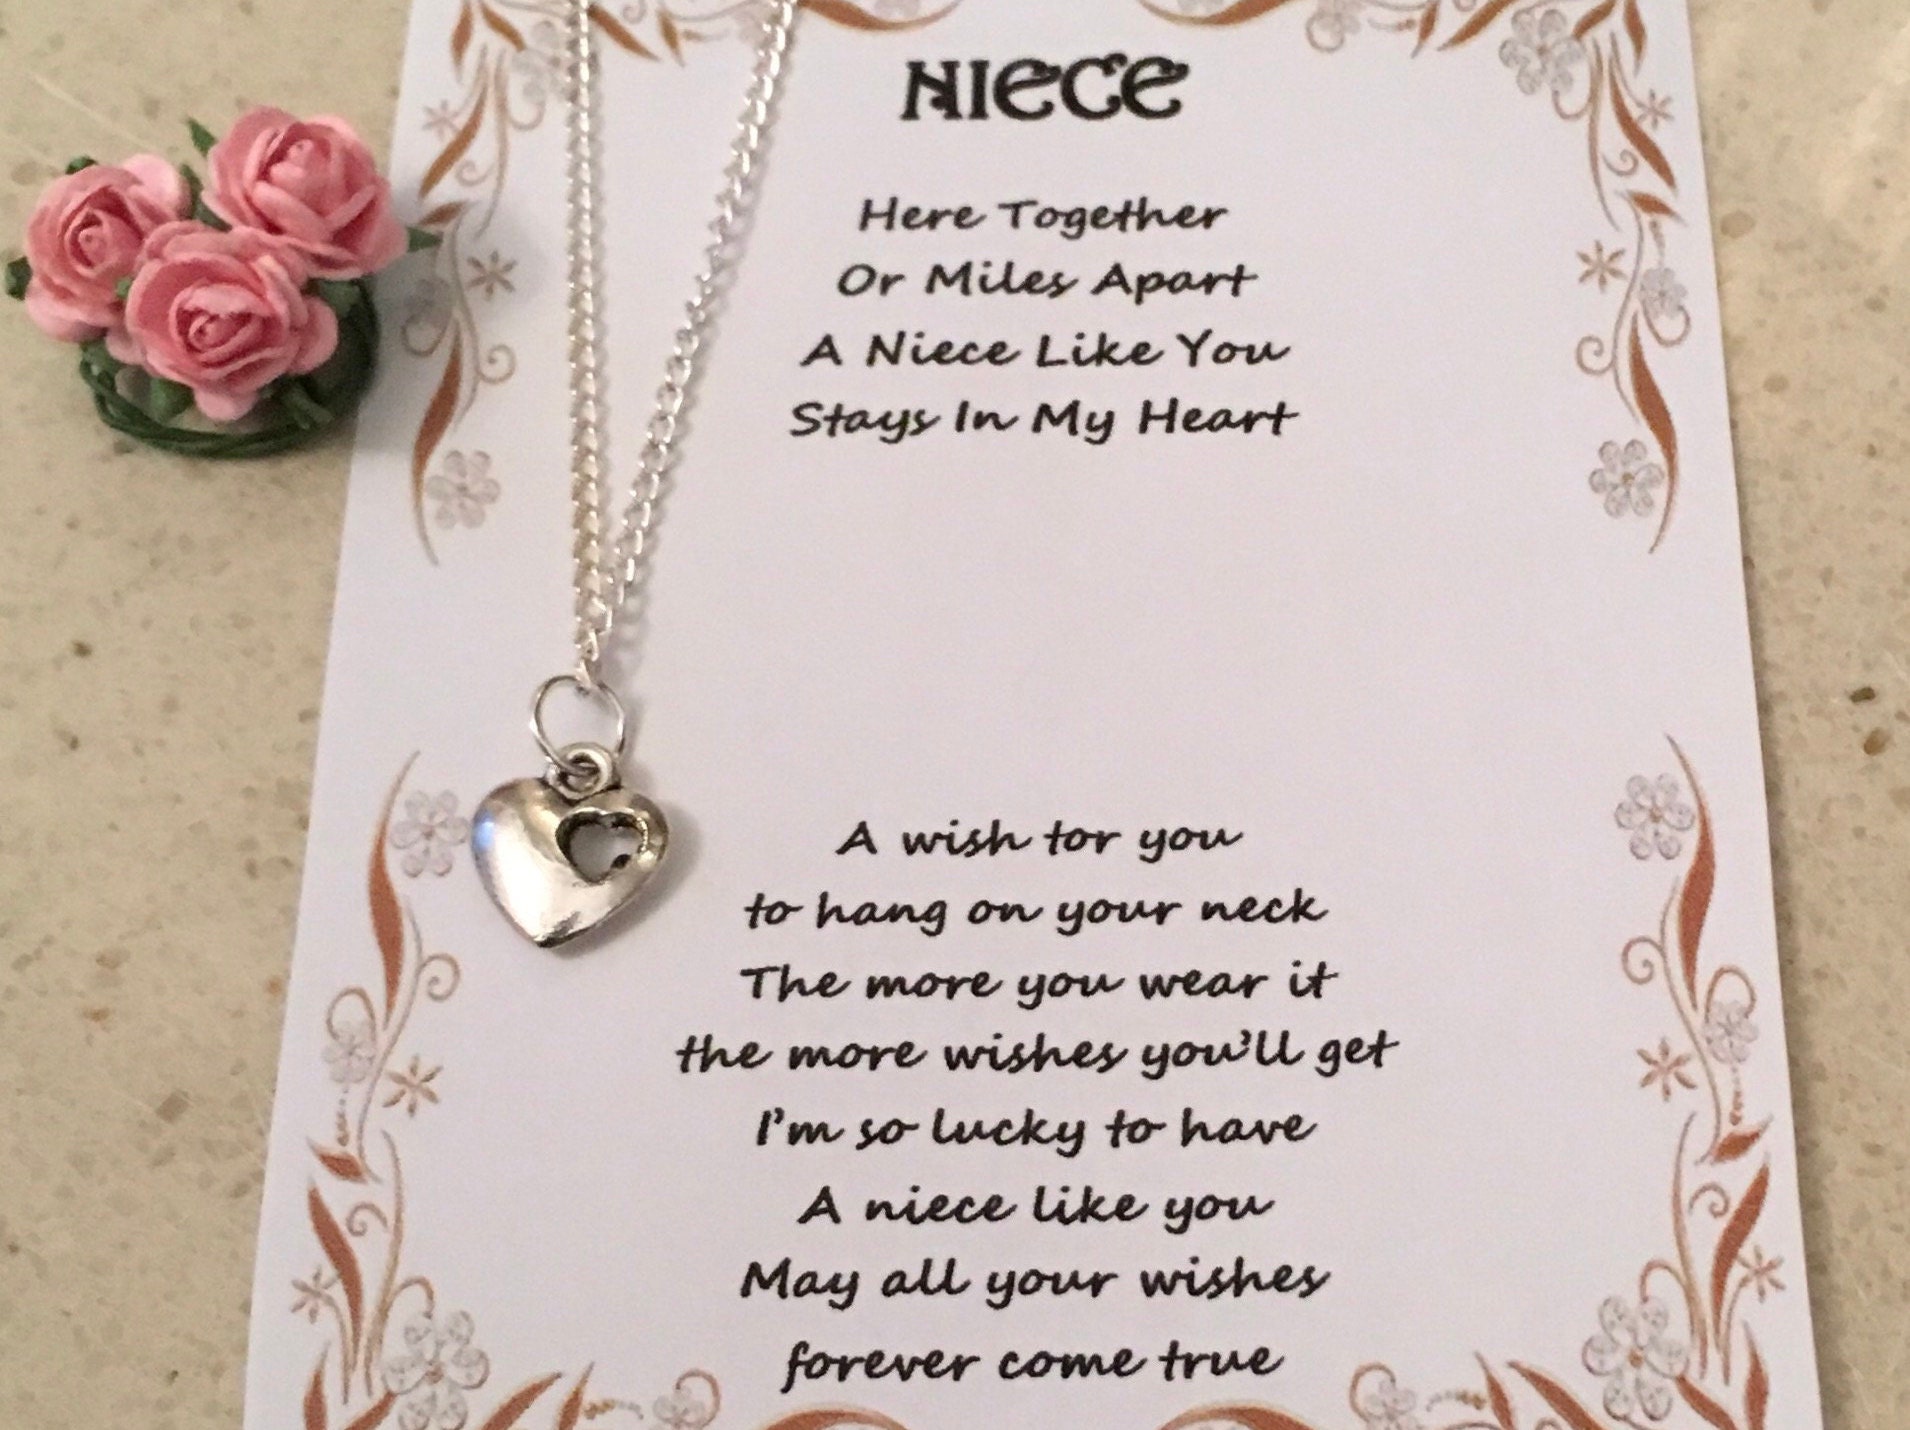 NIECE SILVER PLATED WISH CHARM NECKLACE HEART FLOWER INFINITY GIFT CARD PRESENT